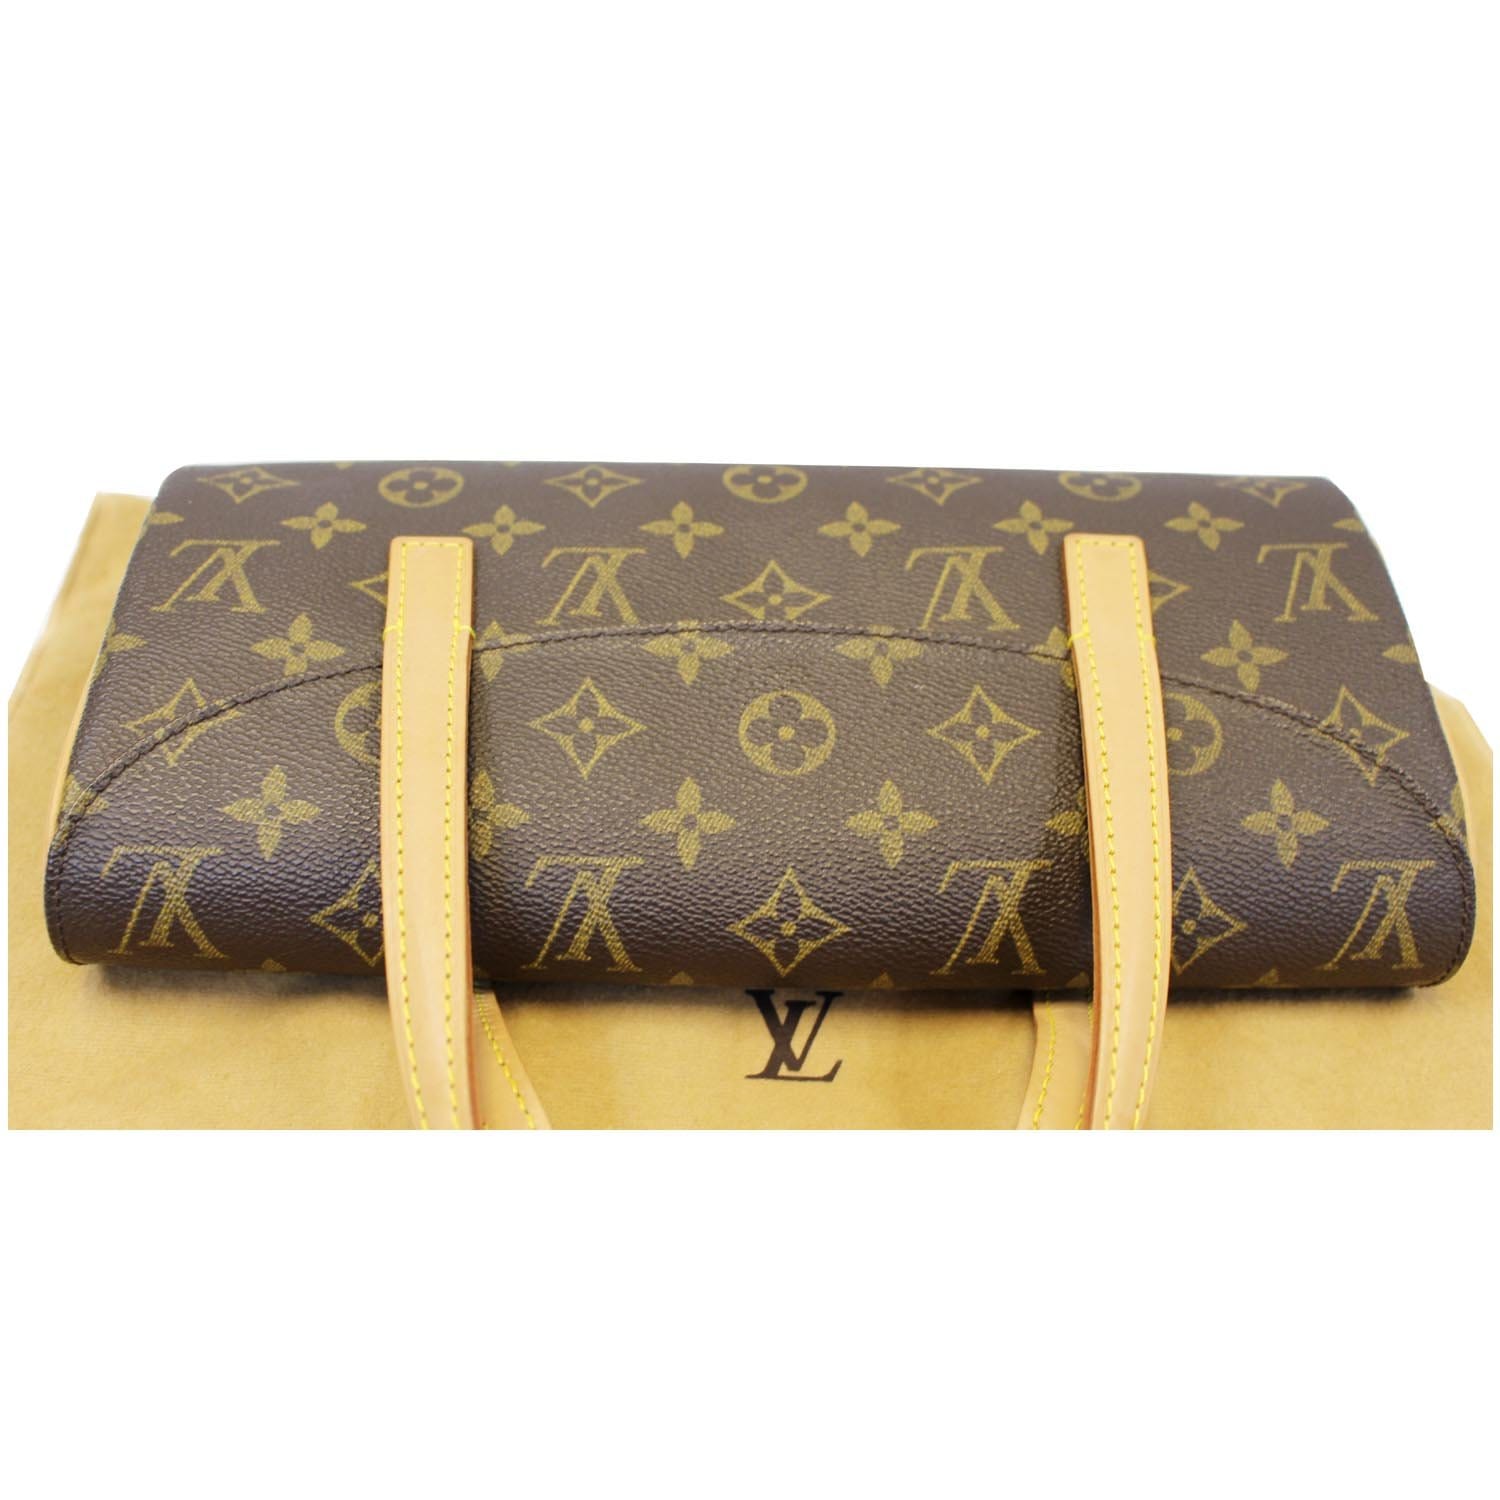 Louis Vuitton Sonatine M51902 Monogram Canvas Hand Bag with added chain A765